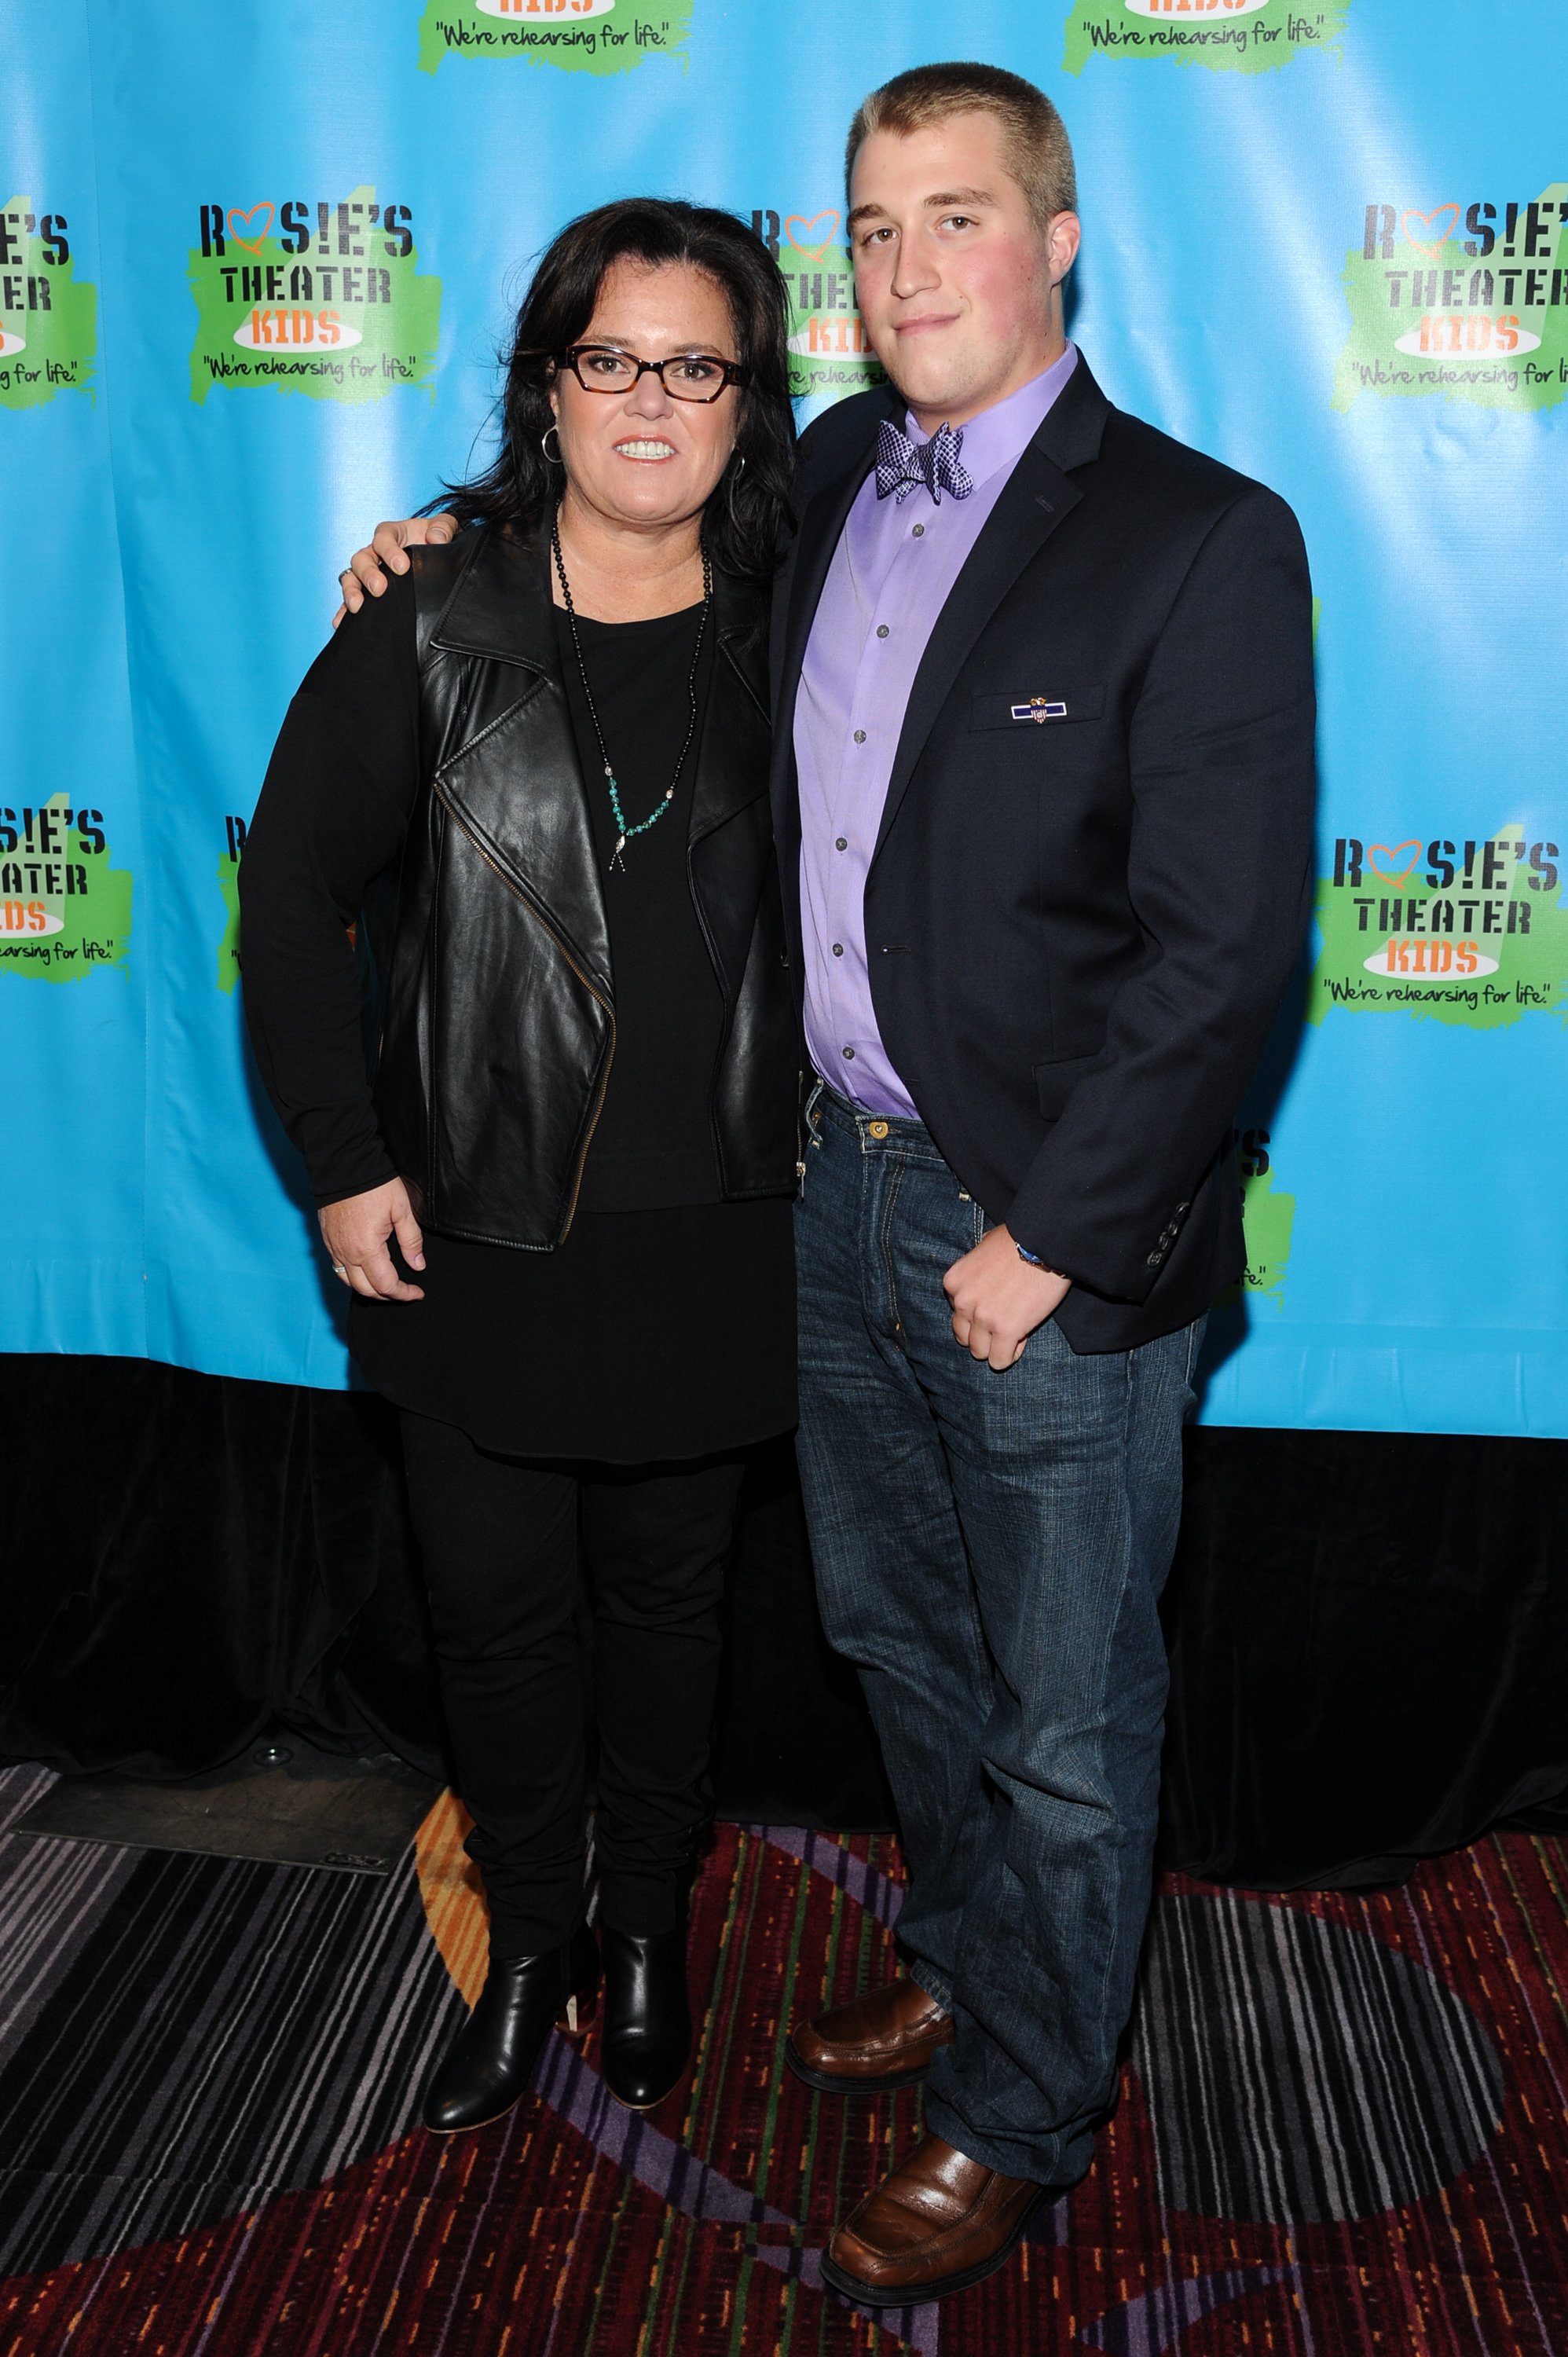 Actress Rosie O'Donnell and her son Parker O'Donnell attending the 11th Annual Rosie's Theater Kids Benefit Gala at The New York Marriott Marquis on September 22, 2014 in New York City. | Source: Getty Images